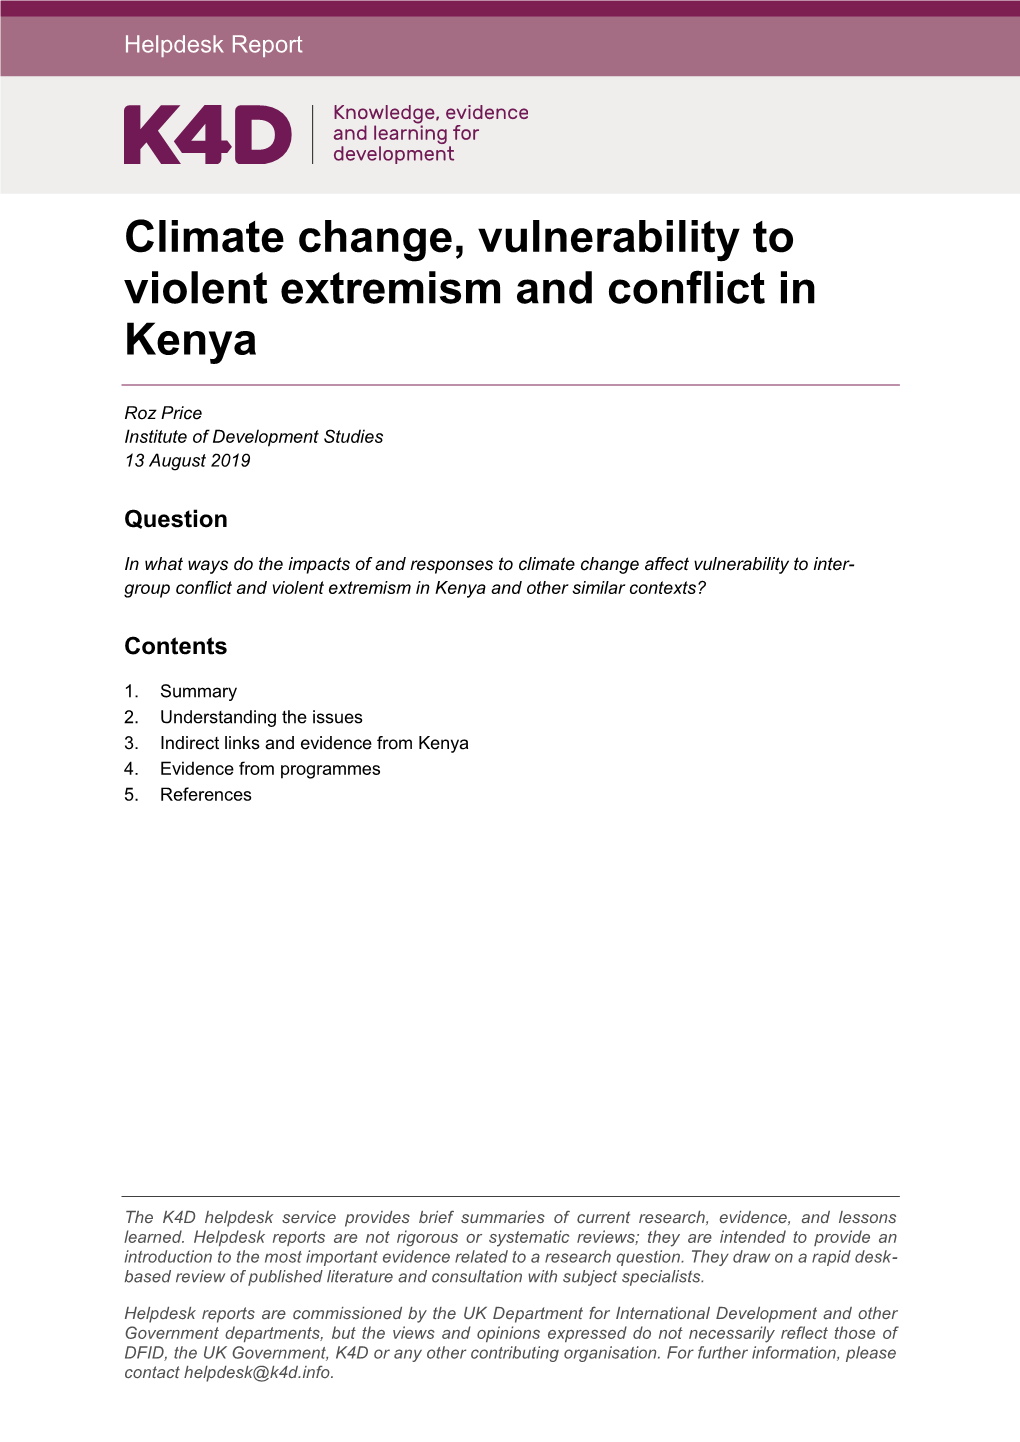 Climate Change, Vulnerability to Violent Extremism and Conflict in Kenya